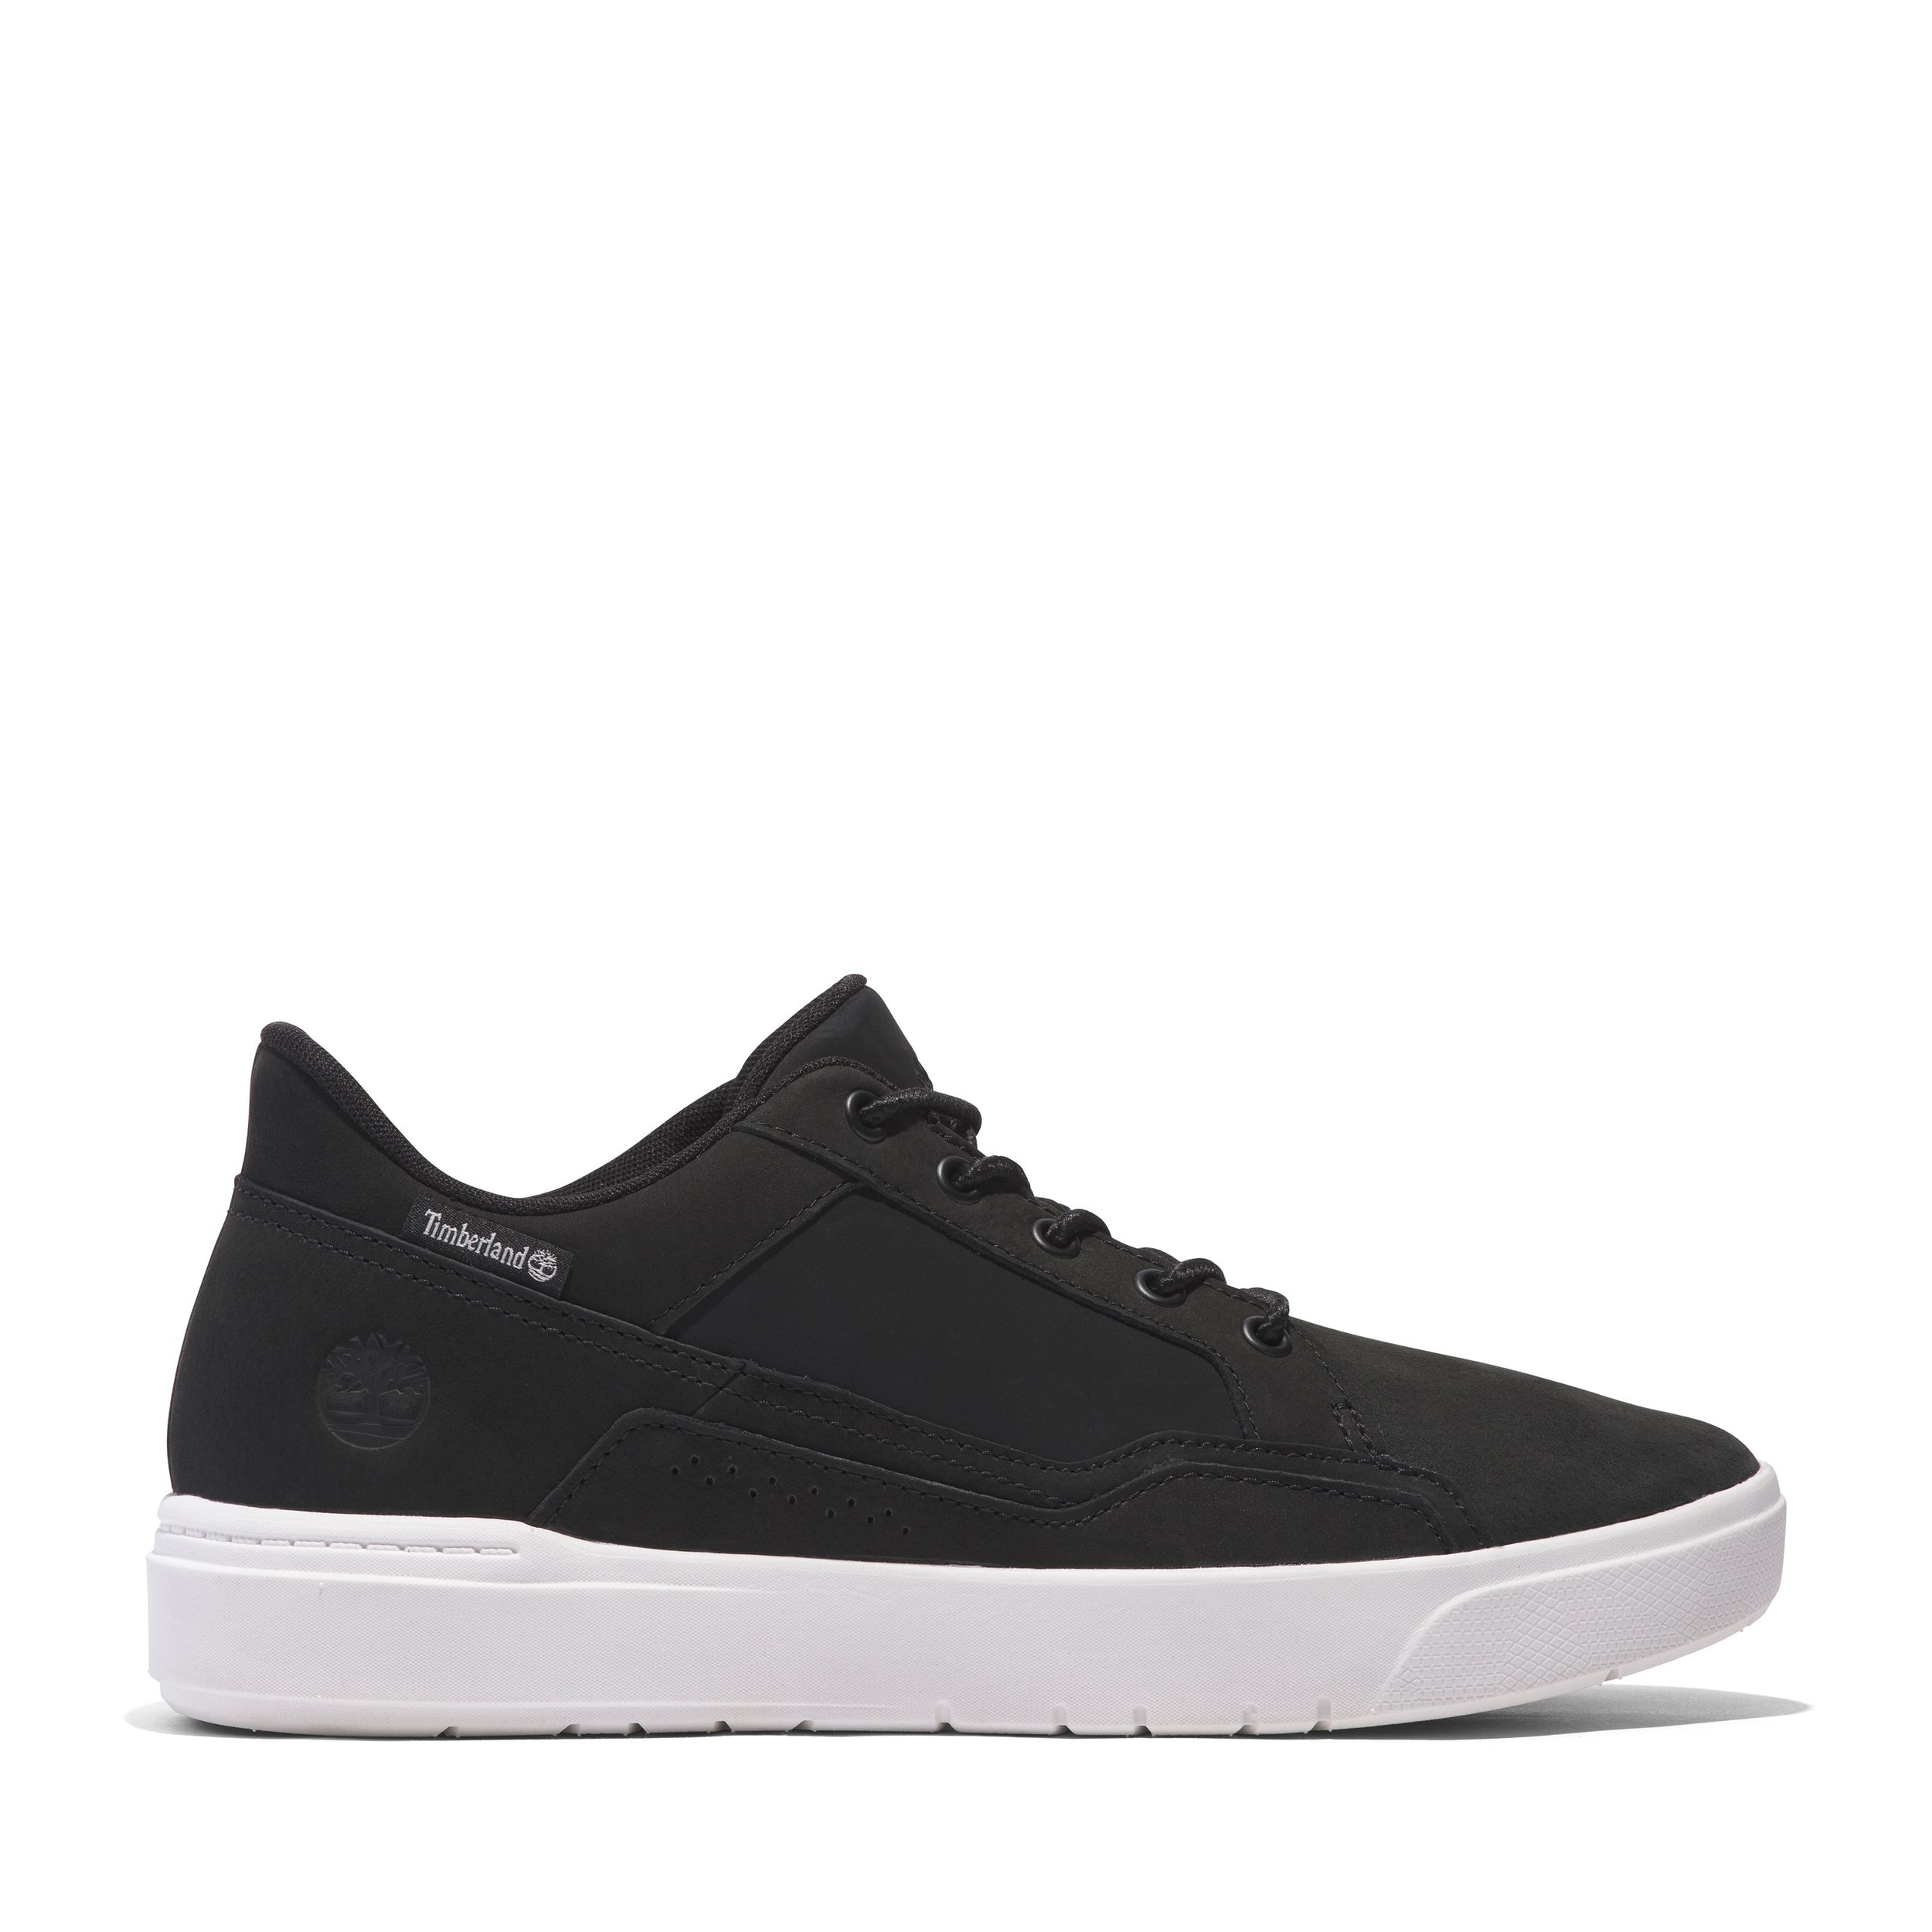 Image of Timberland Men's Allston Low Casual Shoes Sneakers